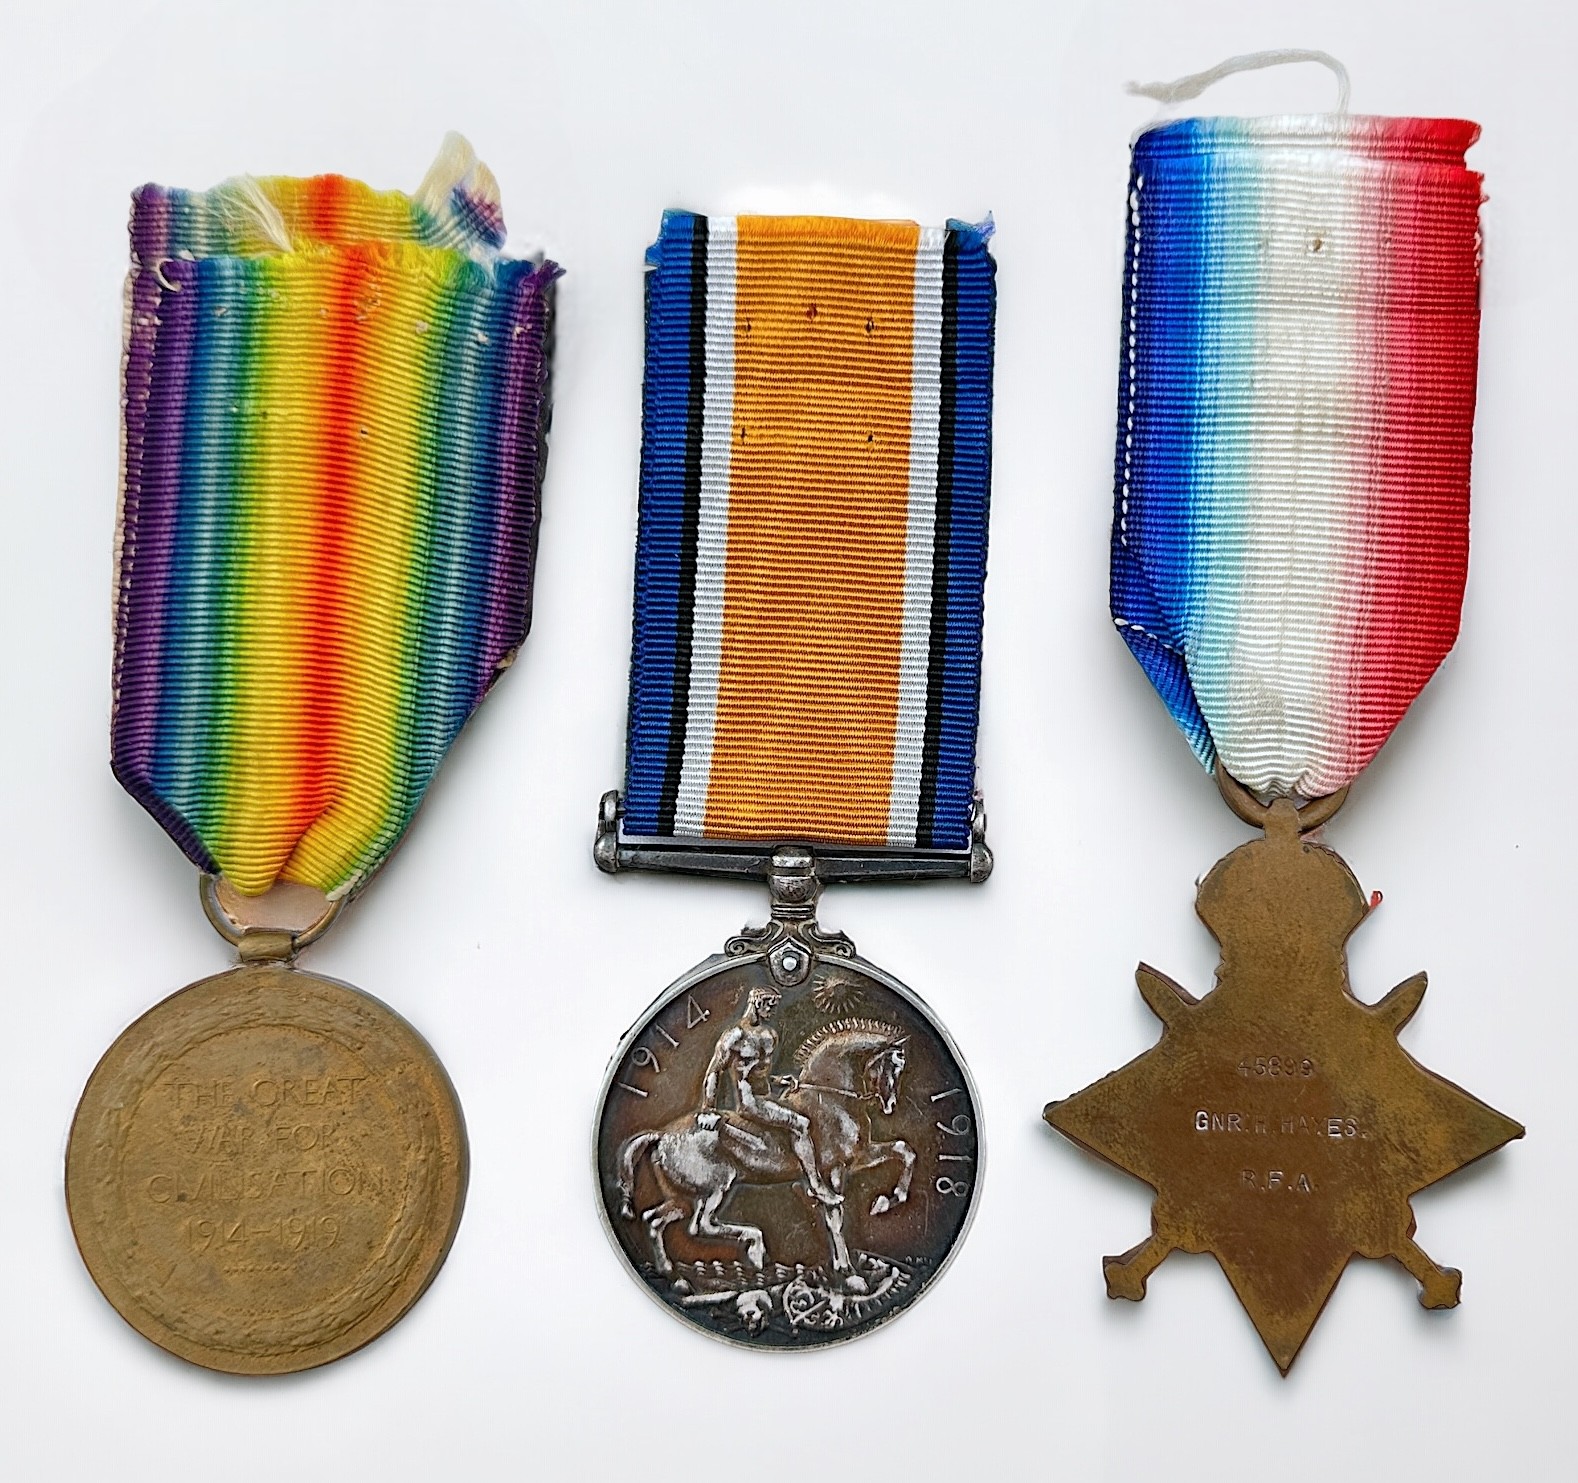 A WW1 Royal Artillery Trio to 45899 GNR. H. Hayes R.F.A. comprising 1914 Mons Star, War Medal and - Image 2 of 2